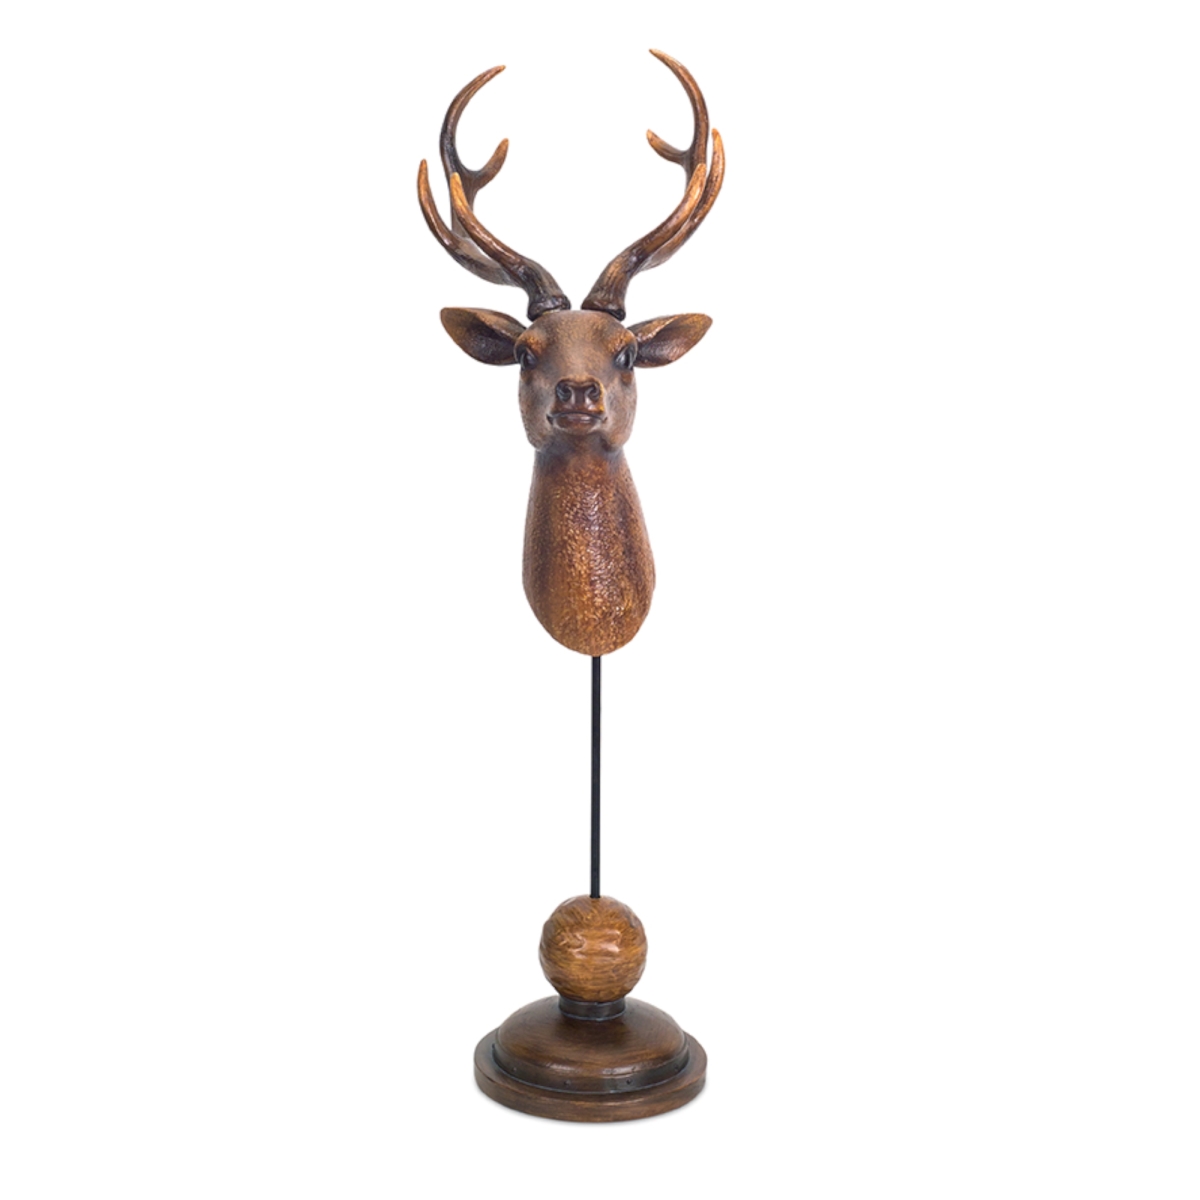 73530ds 24.5 X 10.75 In. Resin Deer Bust Novelty Toys, Brown